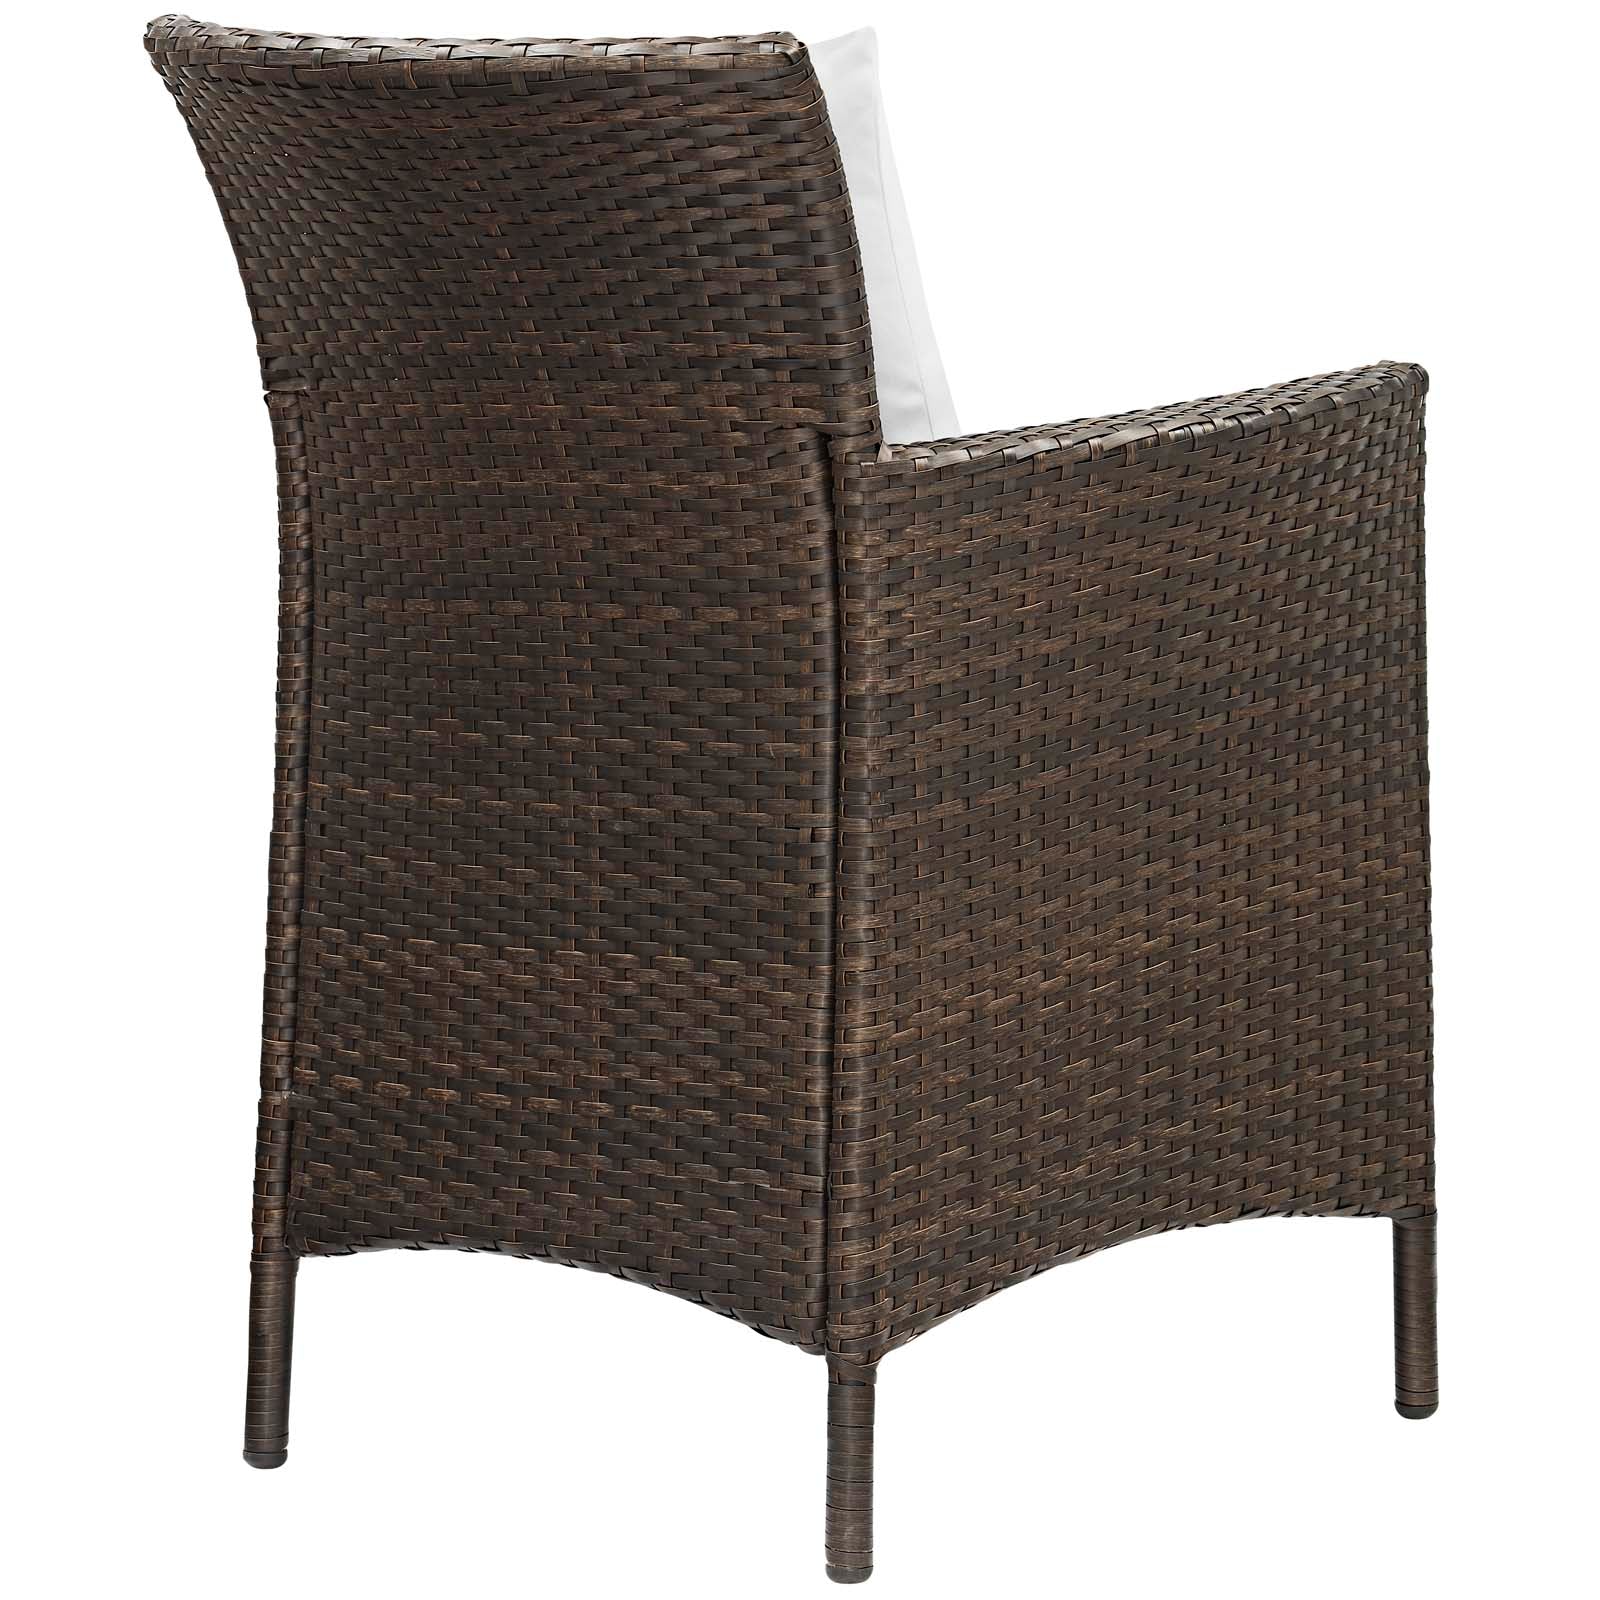 Modway Outdoor Dining Chairs - Conduit Outdoor Patio Wicker Rattan Dining Armchair Brown White